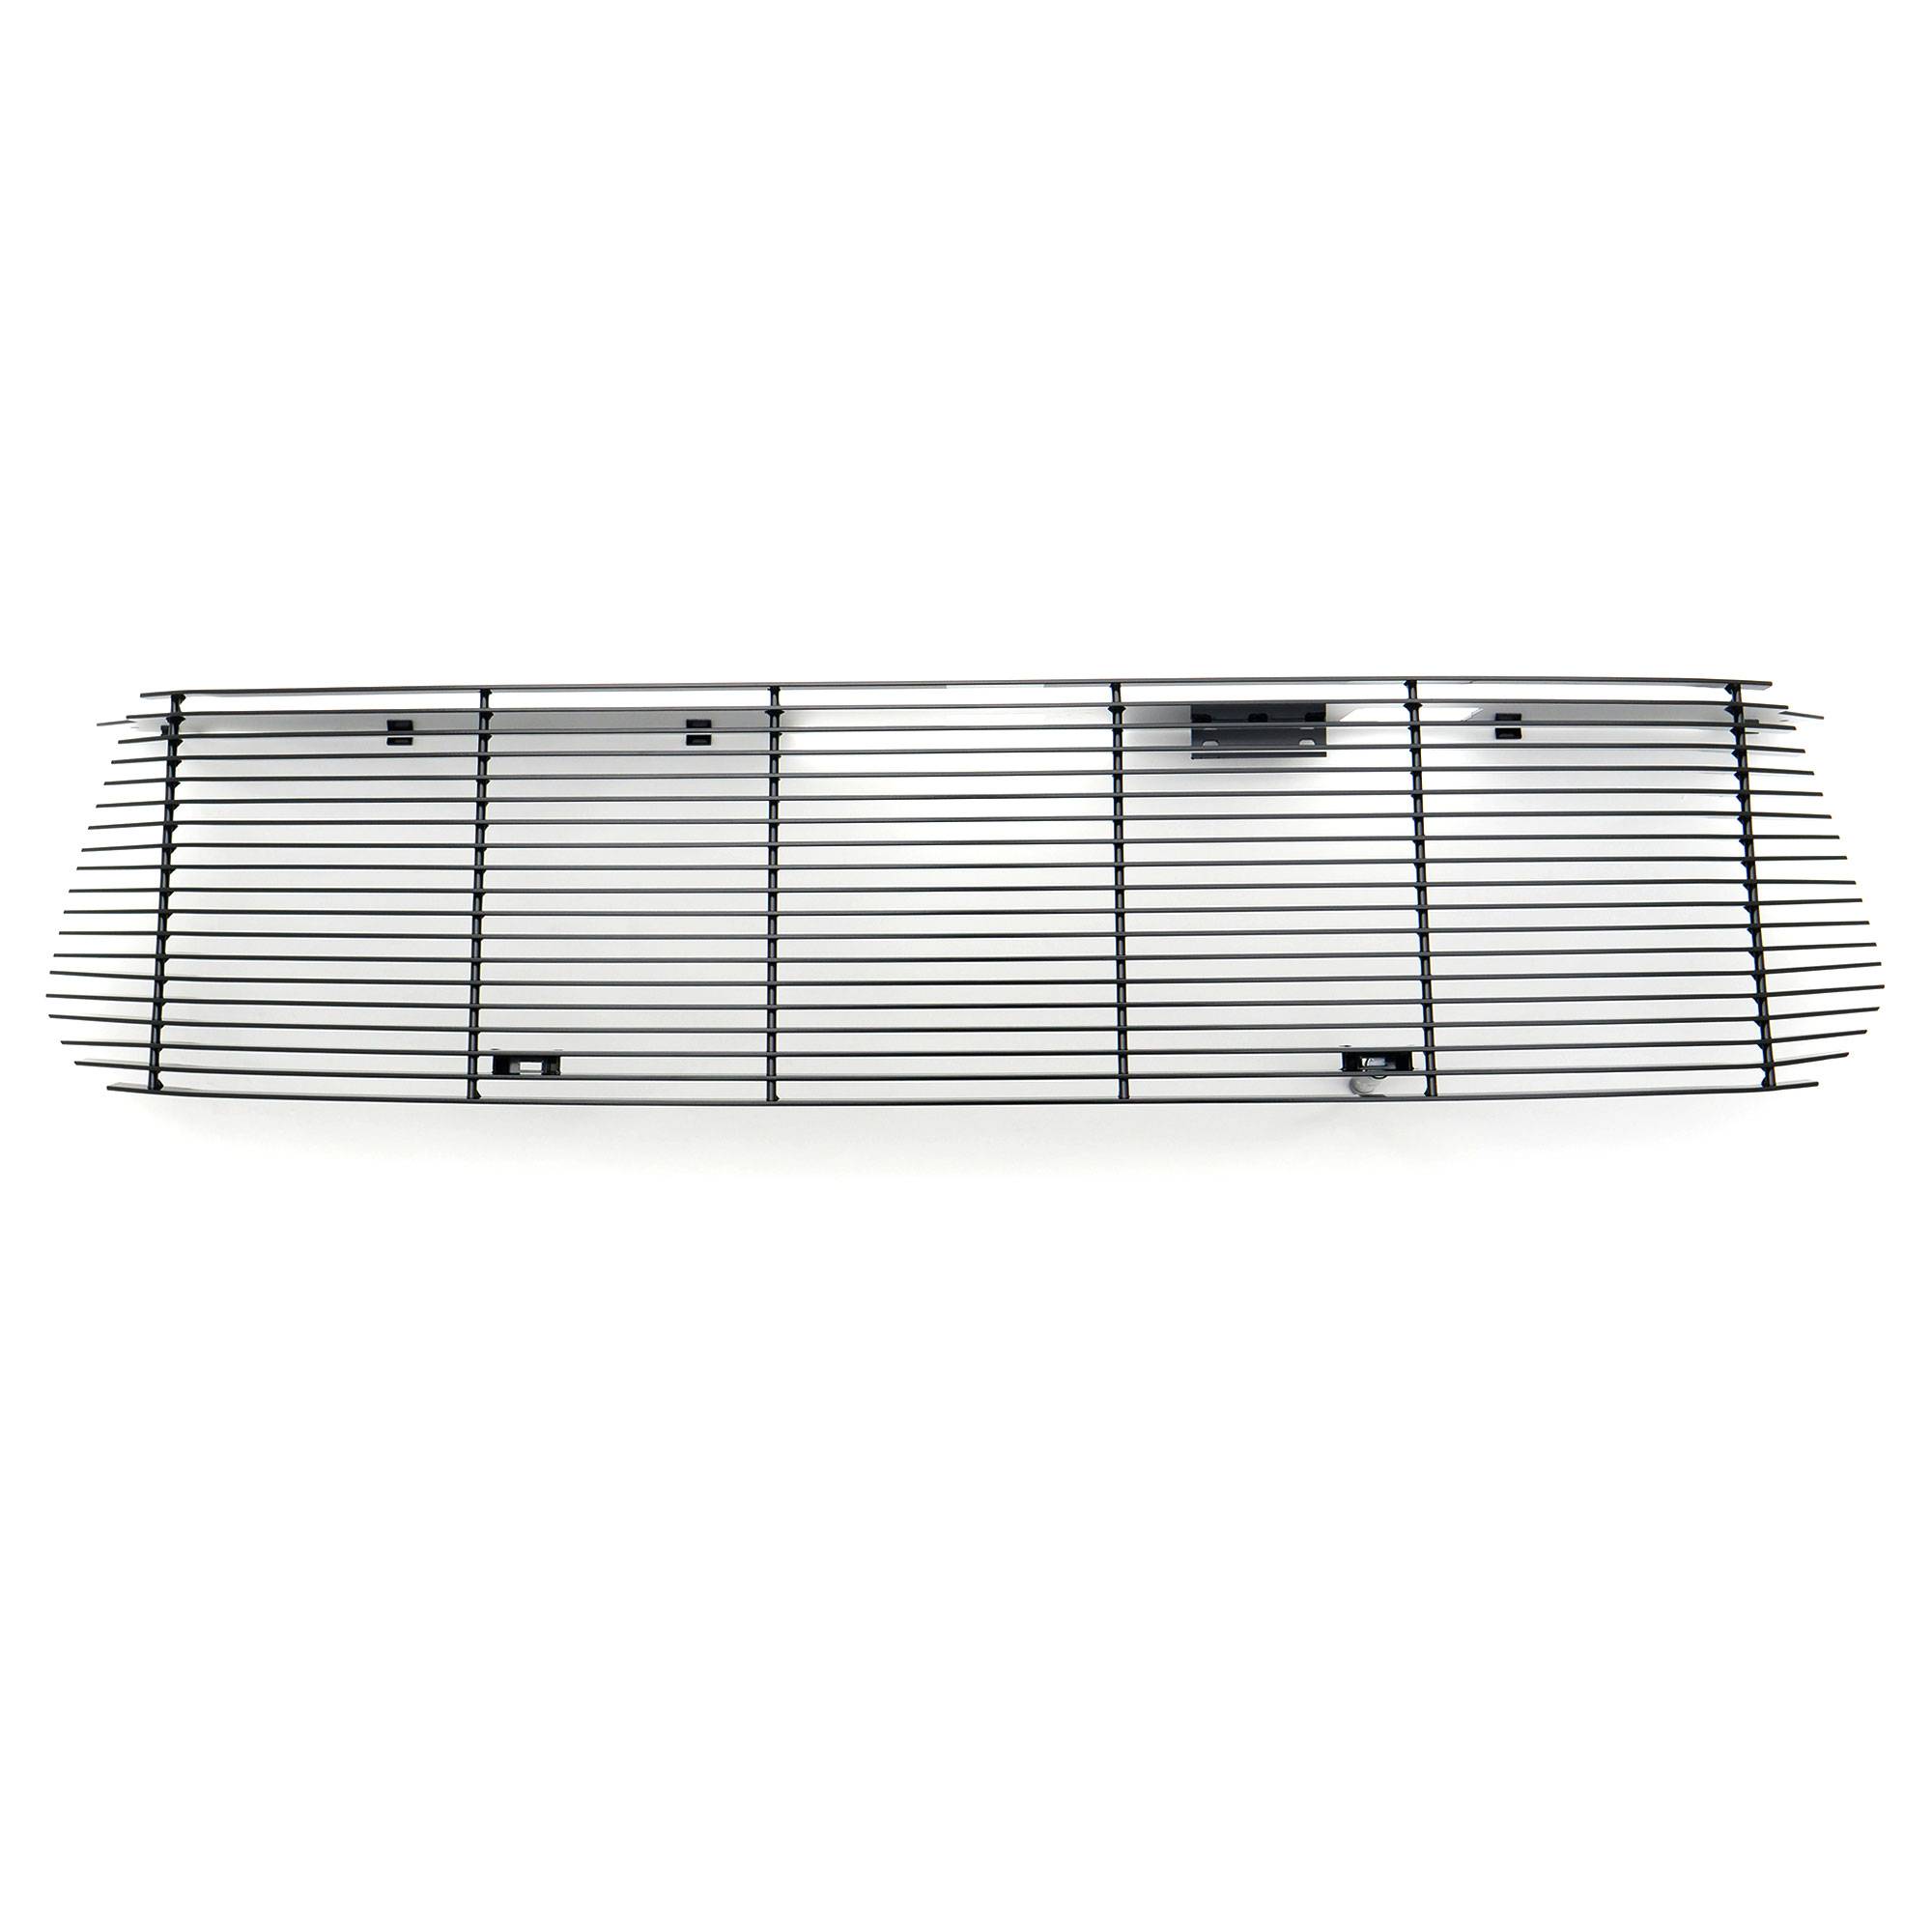 2014-2017 Tundra Billet Grille, Black, 1 Pc, Replacement - Part